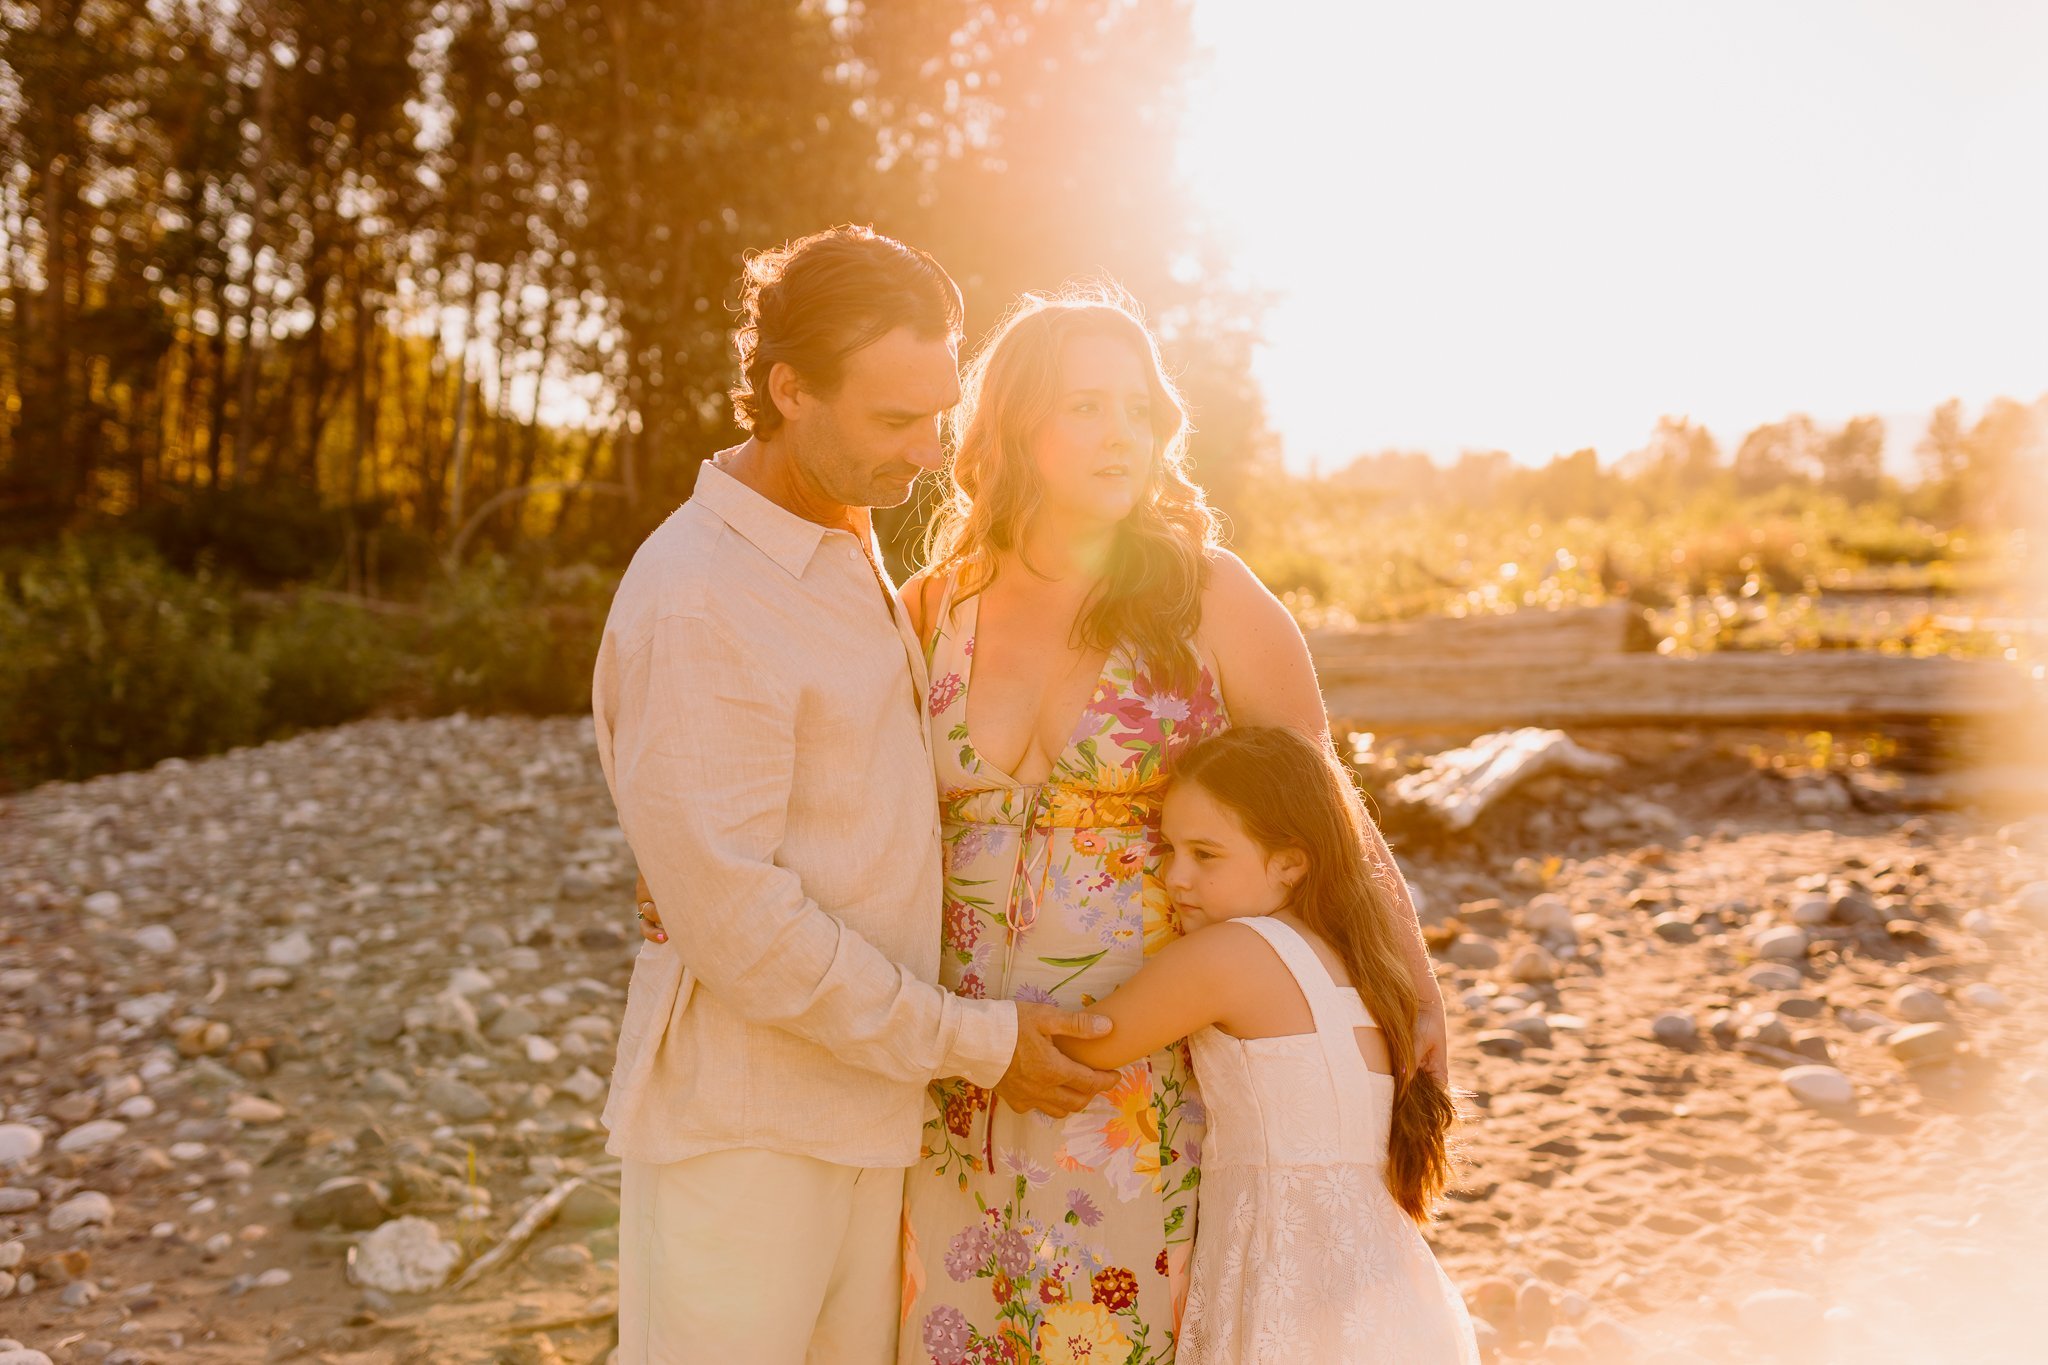 Vedder+River+Family+Session+-+Anna+Hurley+Photography++(13).jpg